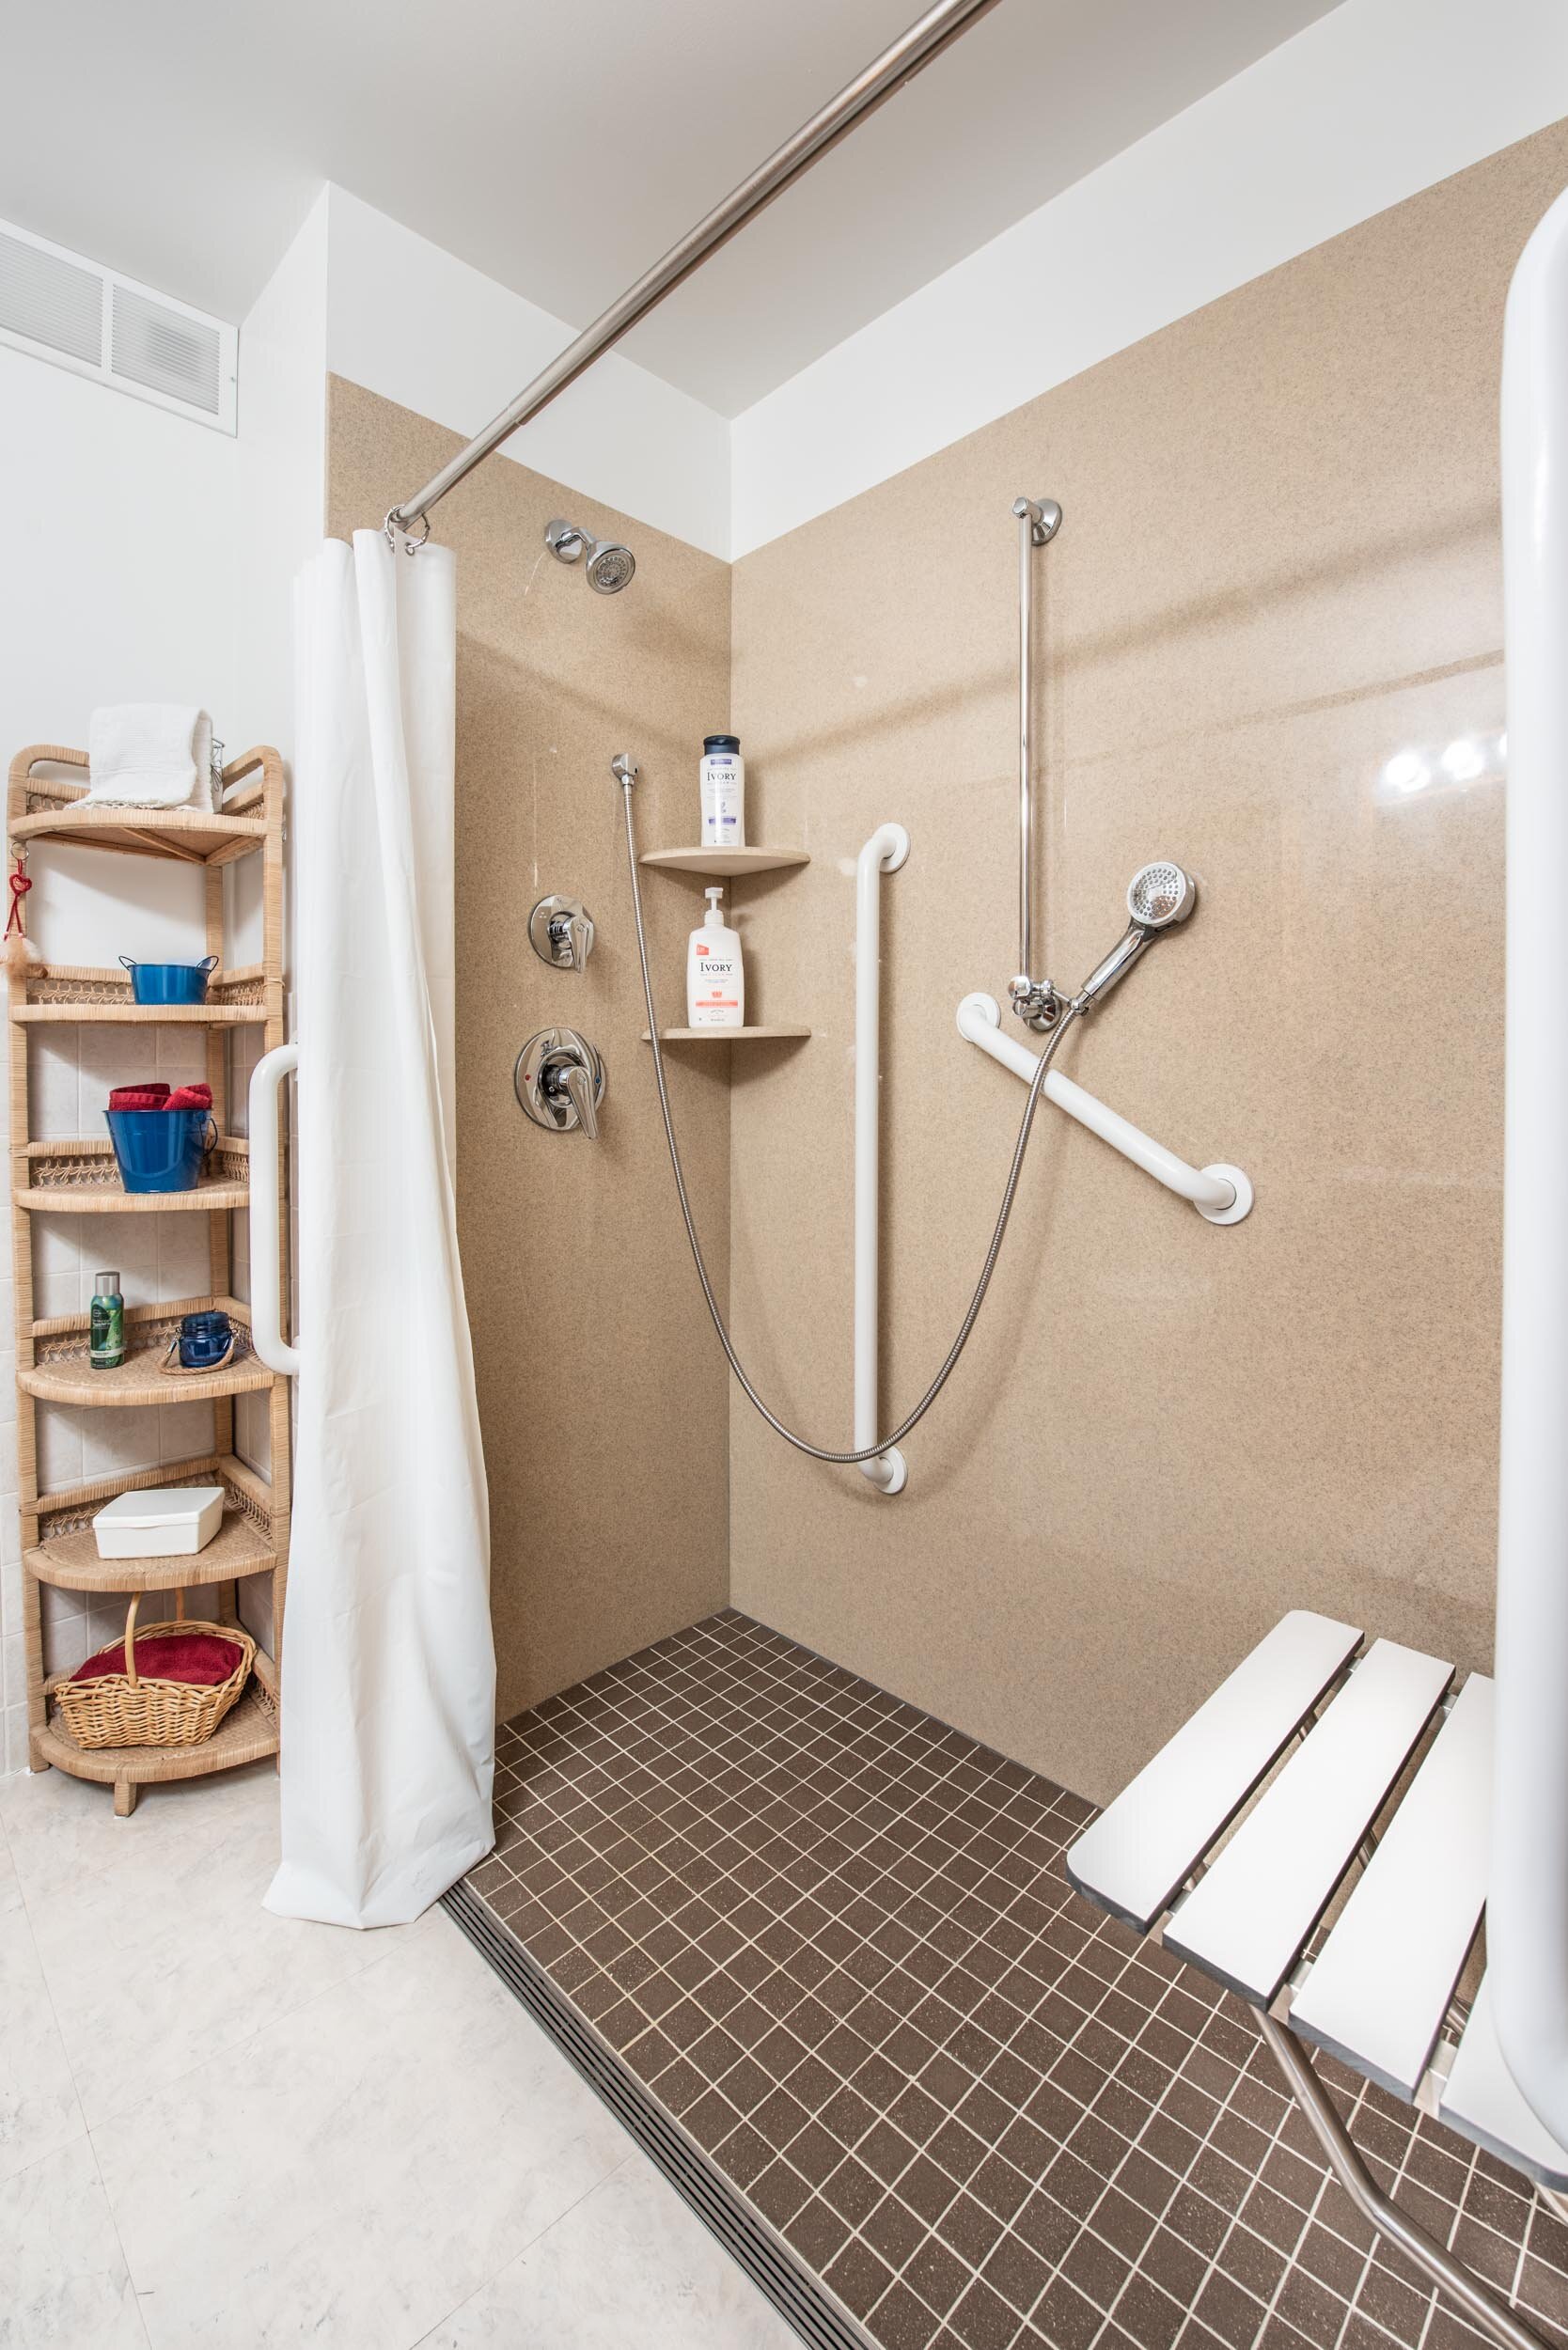 Bathtub Remodeling: Aging In Place Tub-To-Shower Conversions — Degnan  Design-Build-Remodel